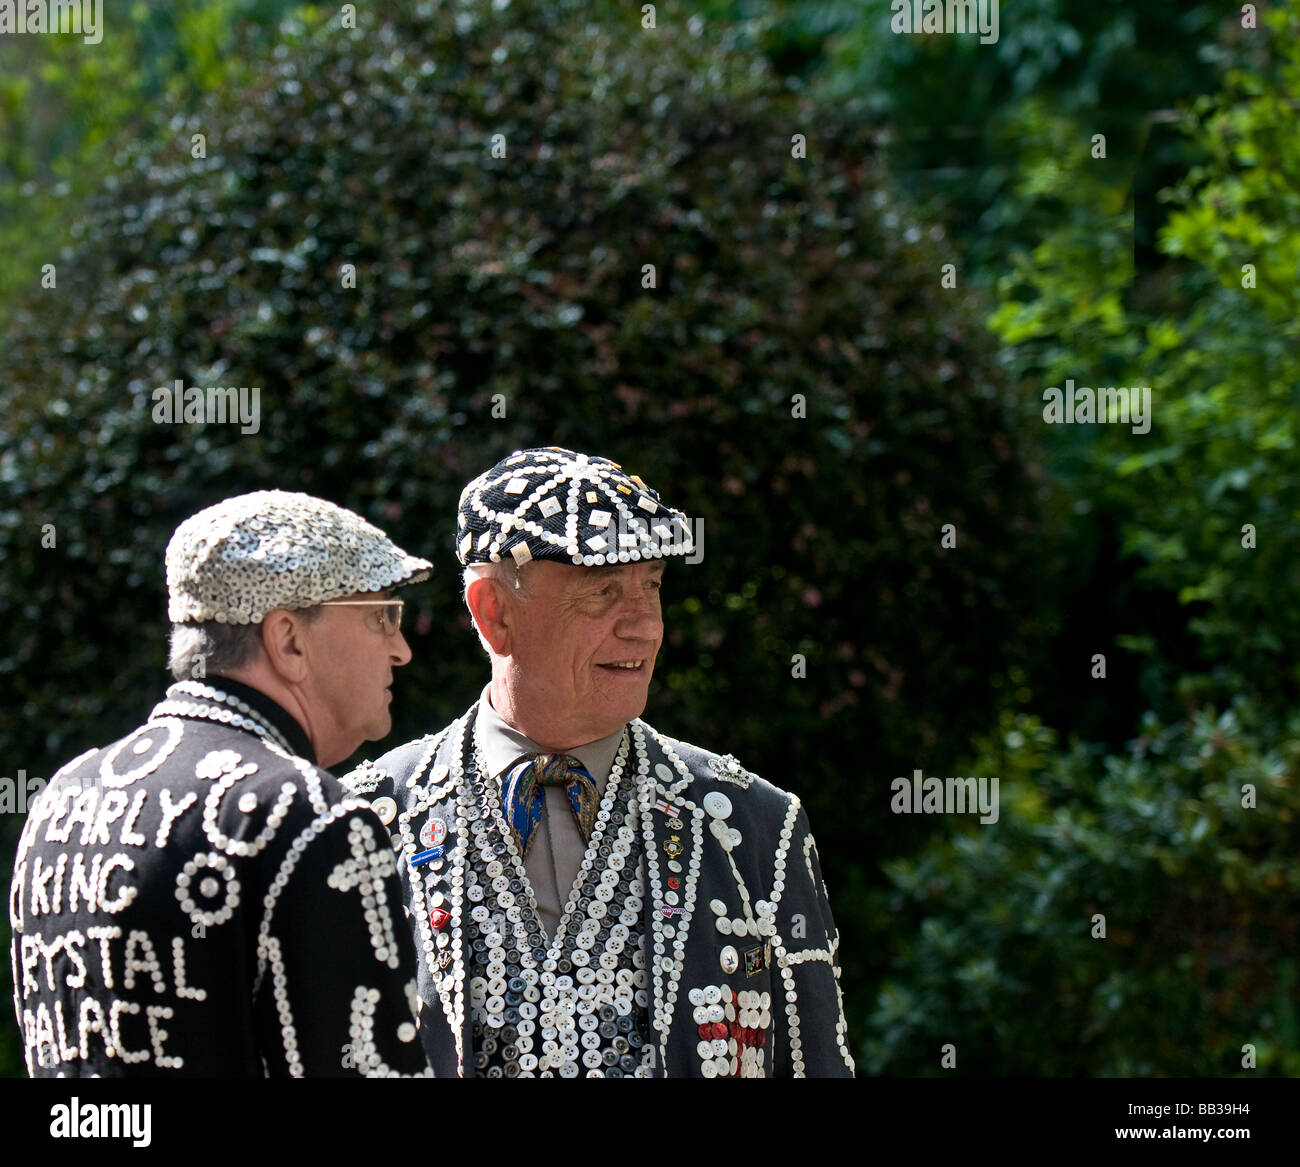 The Pearly King of Highgate talking to the Pearly King of Crystal Palace in London.  Photo by Gordon Scammell Stock Photo